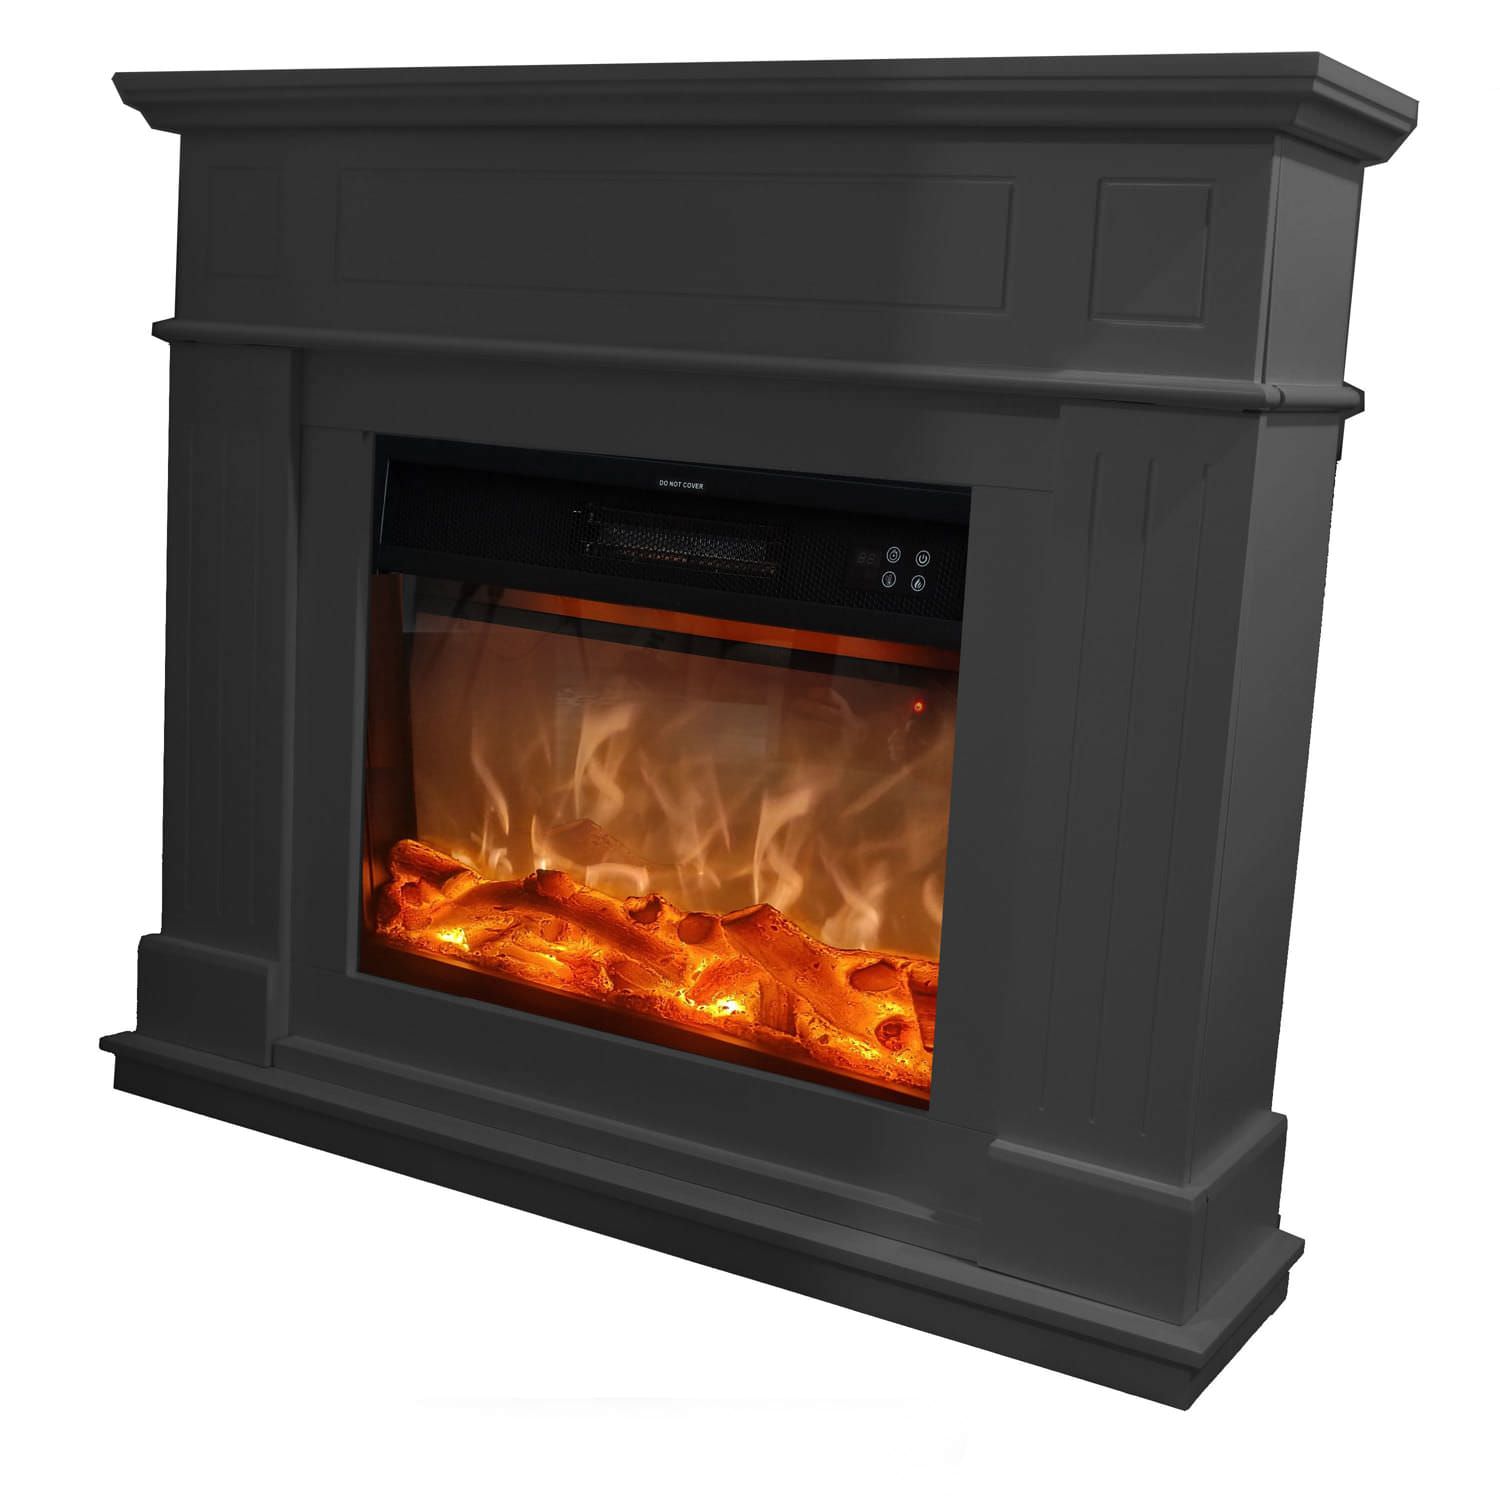 Albertoant Complete Electric Fireplace